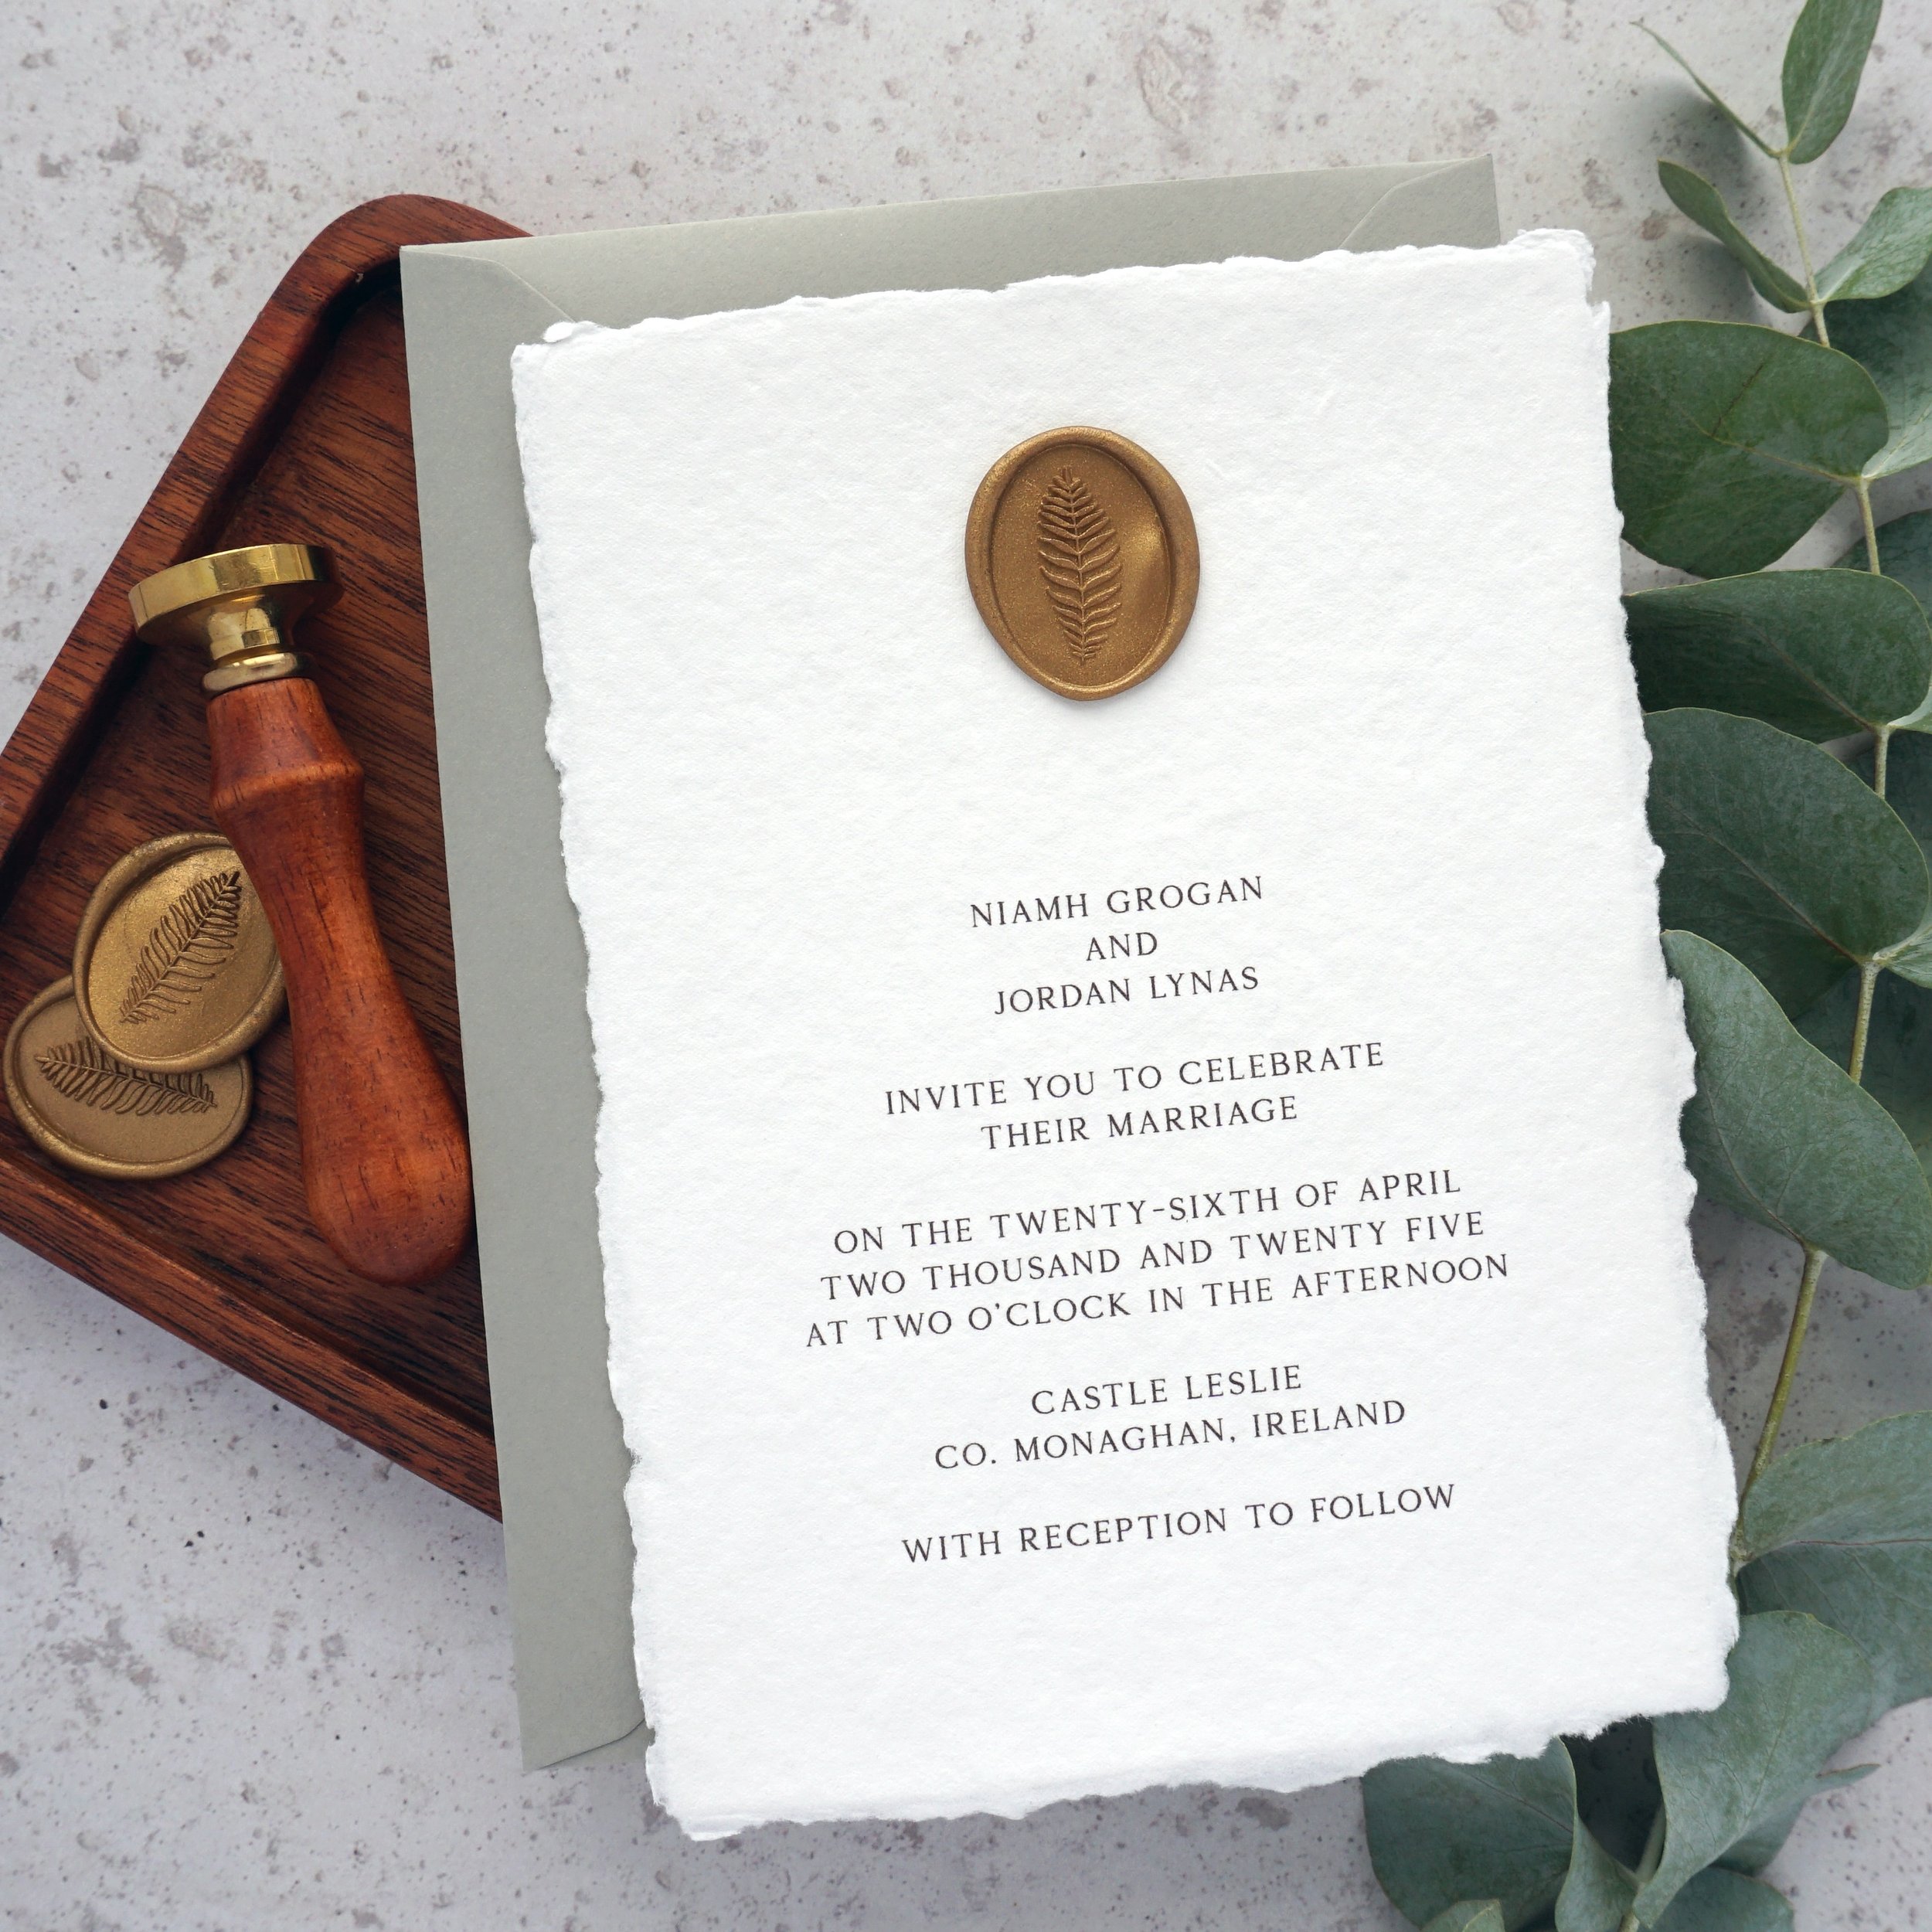 NIAMH - Printed on delicate handmade paper and finished with an oval wax seal, the Niamh suite offers stylish simplicity. Seen here with a beautiful sage green envelope, but easily altered to match your colour scheme. Set the tone of your wedding wit